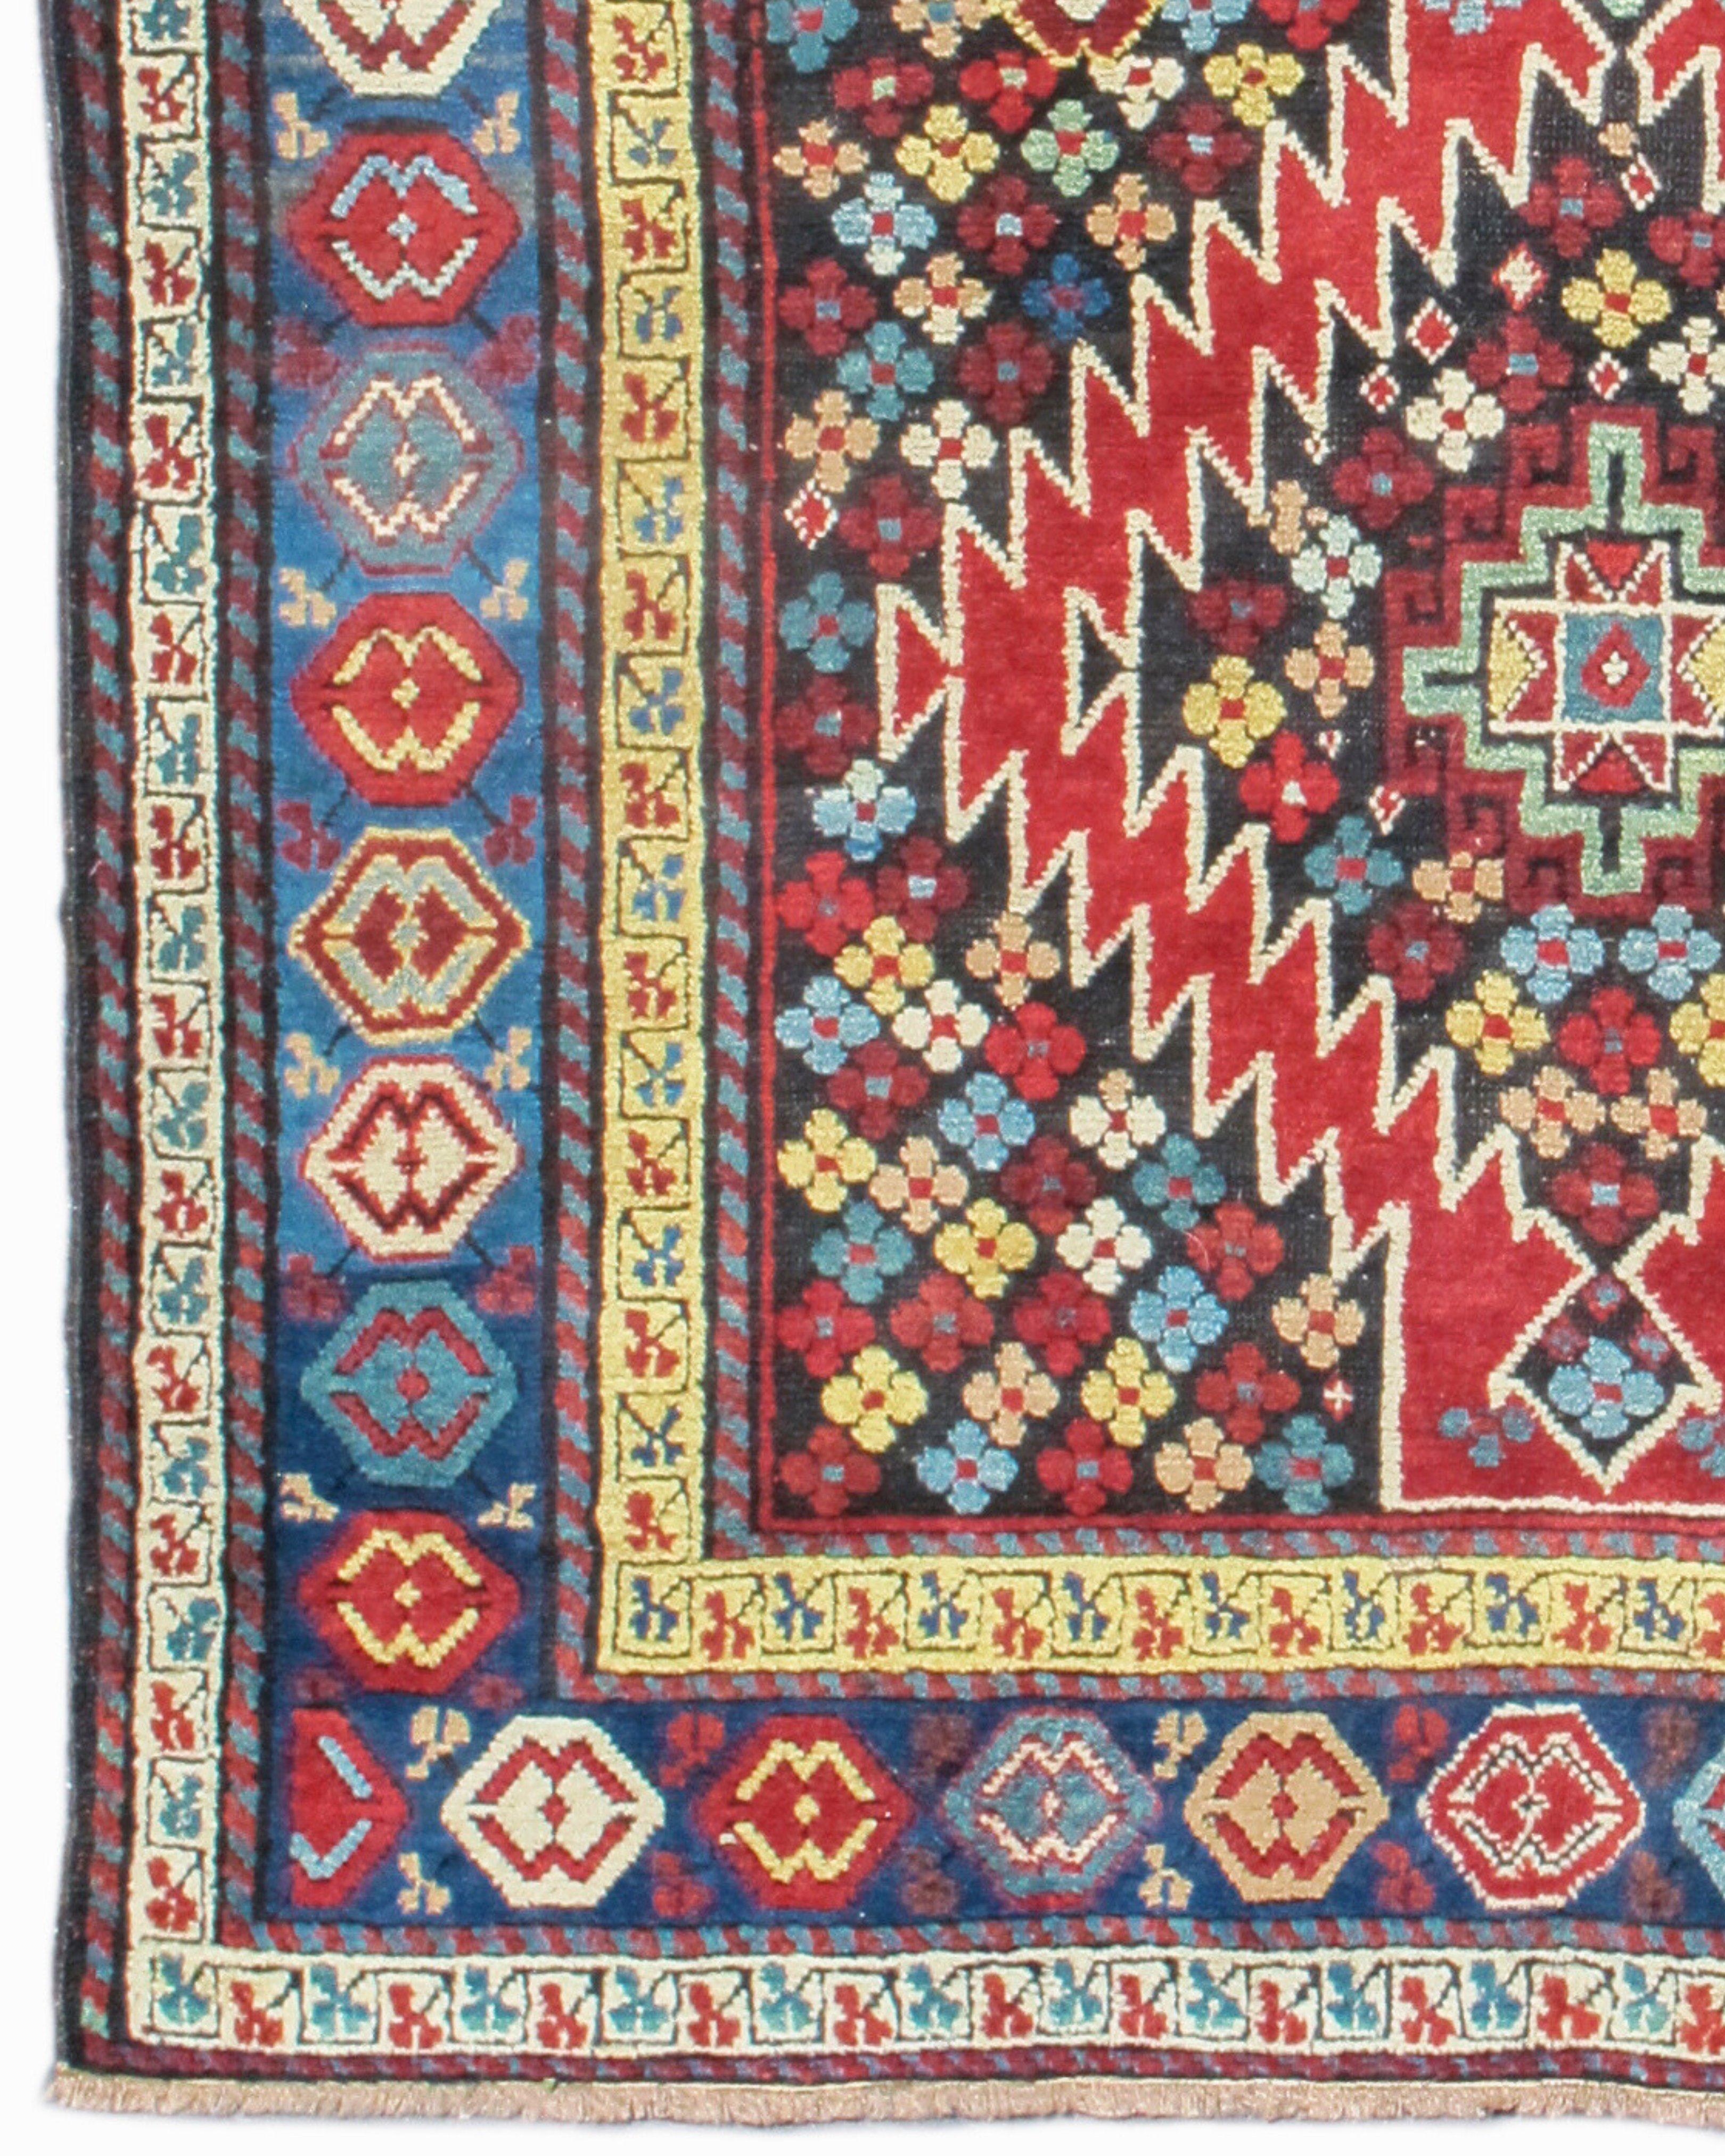 Antique Caucasian Karabagh Rug, Late 19th Century  In Excellent Condition For Sale In San Francisco, CA